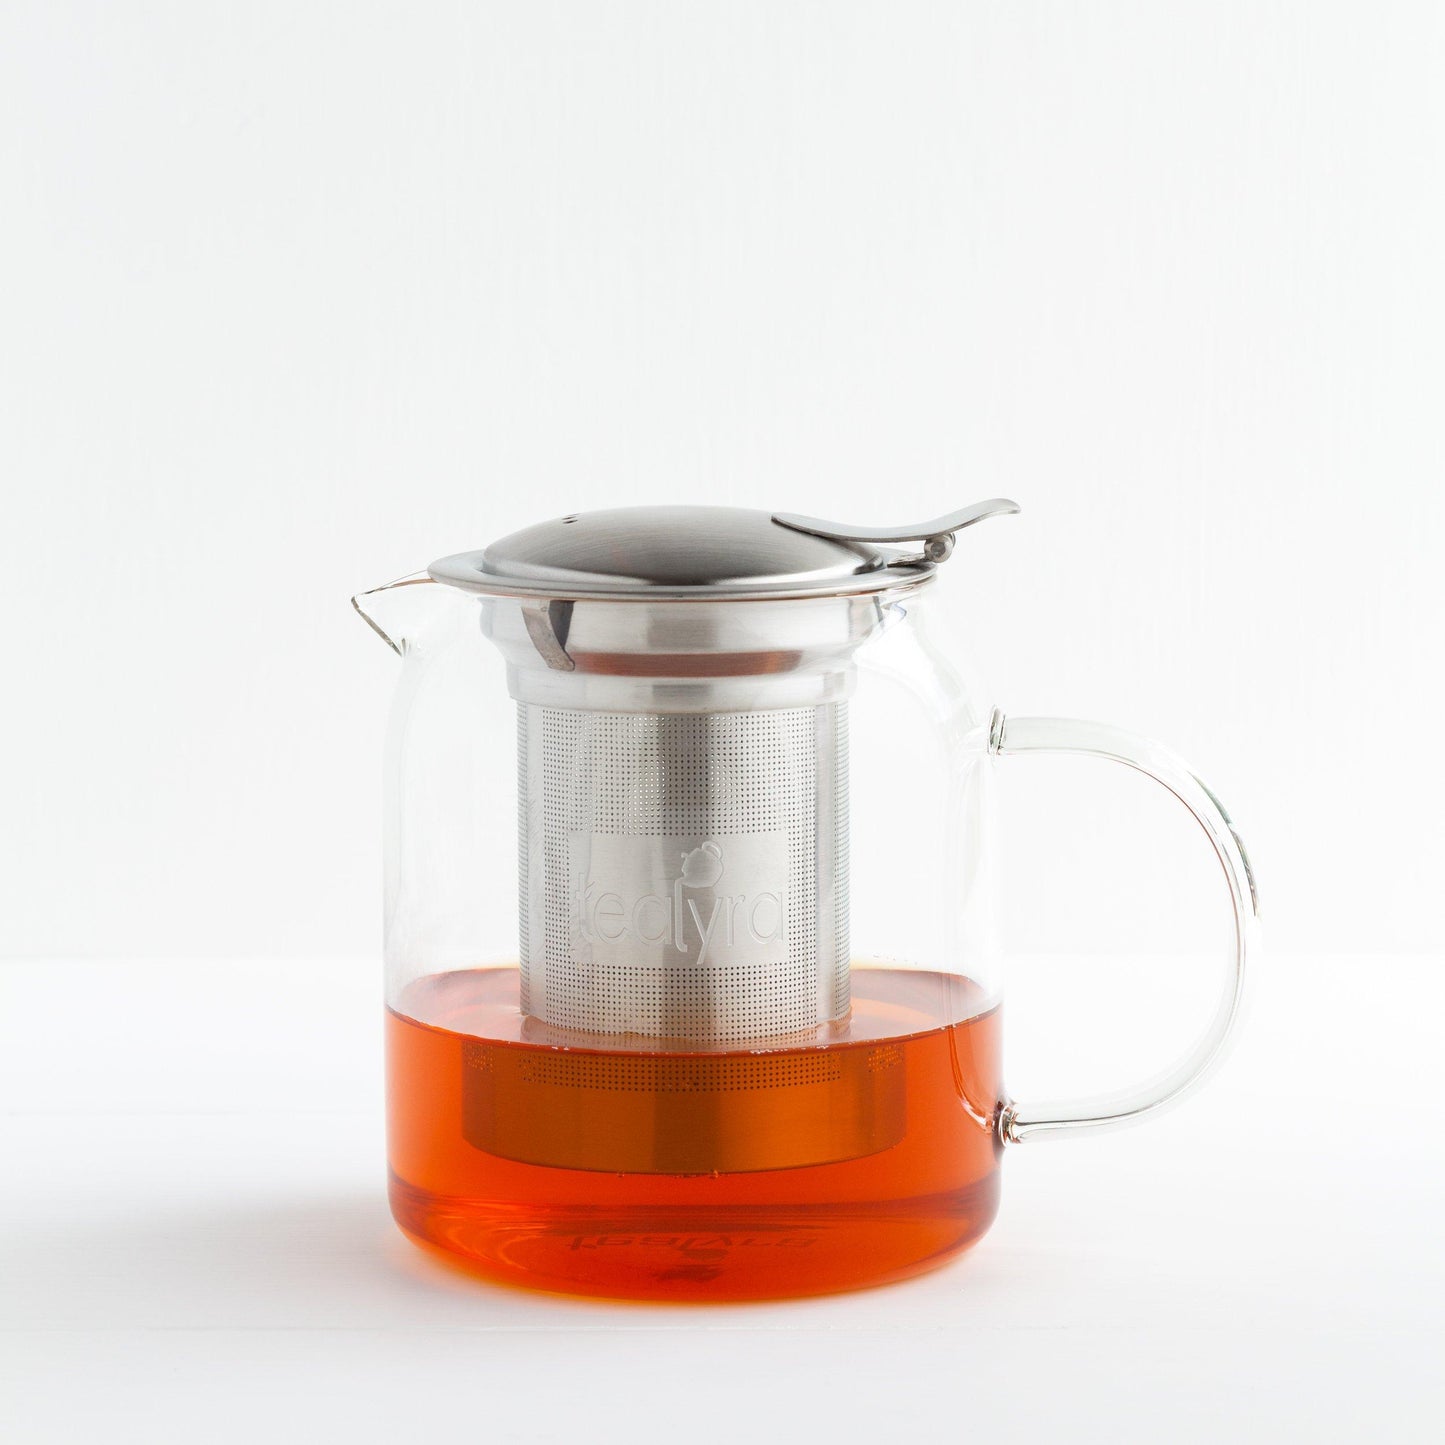 Glass Teapot with Stainless Steel Infuser, shown approximately one-third full with brewed tea.